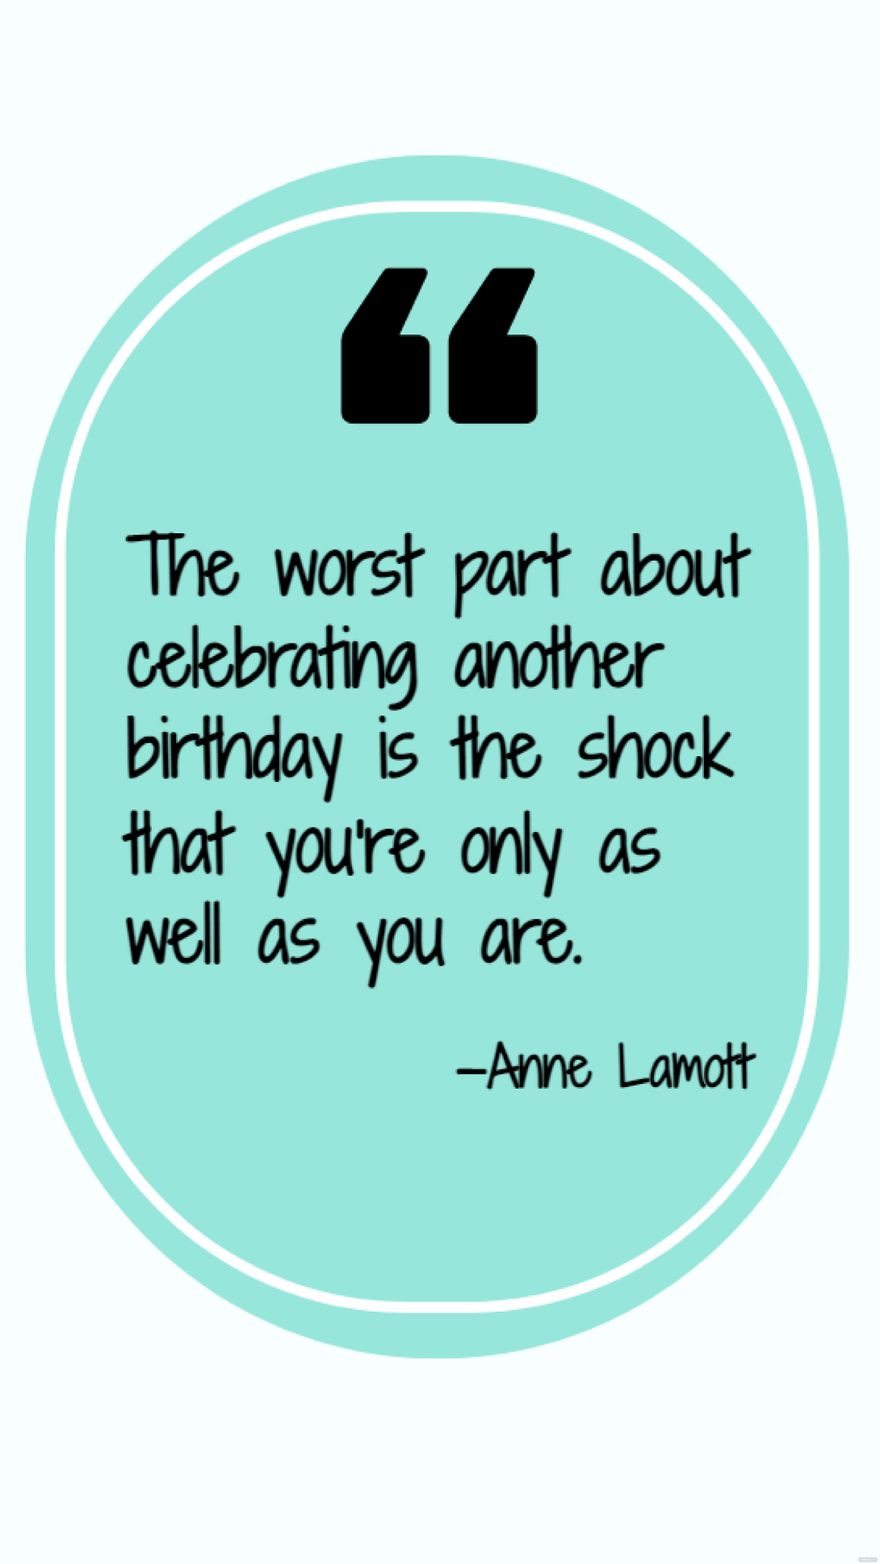 Anne Lamott - The worst part about celebrating another birthday is the shock that you're only as well as you are.